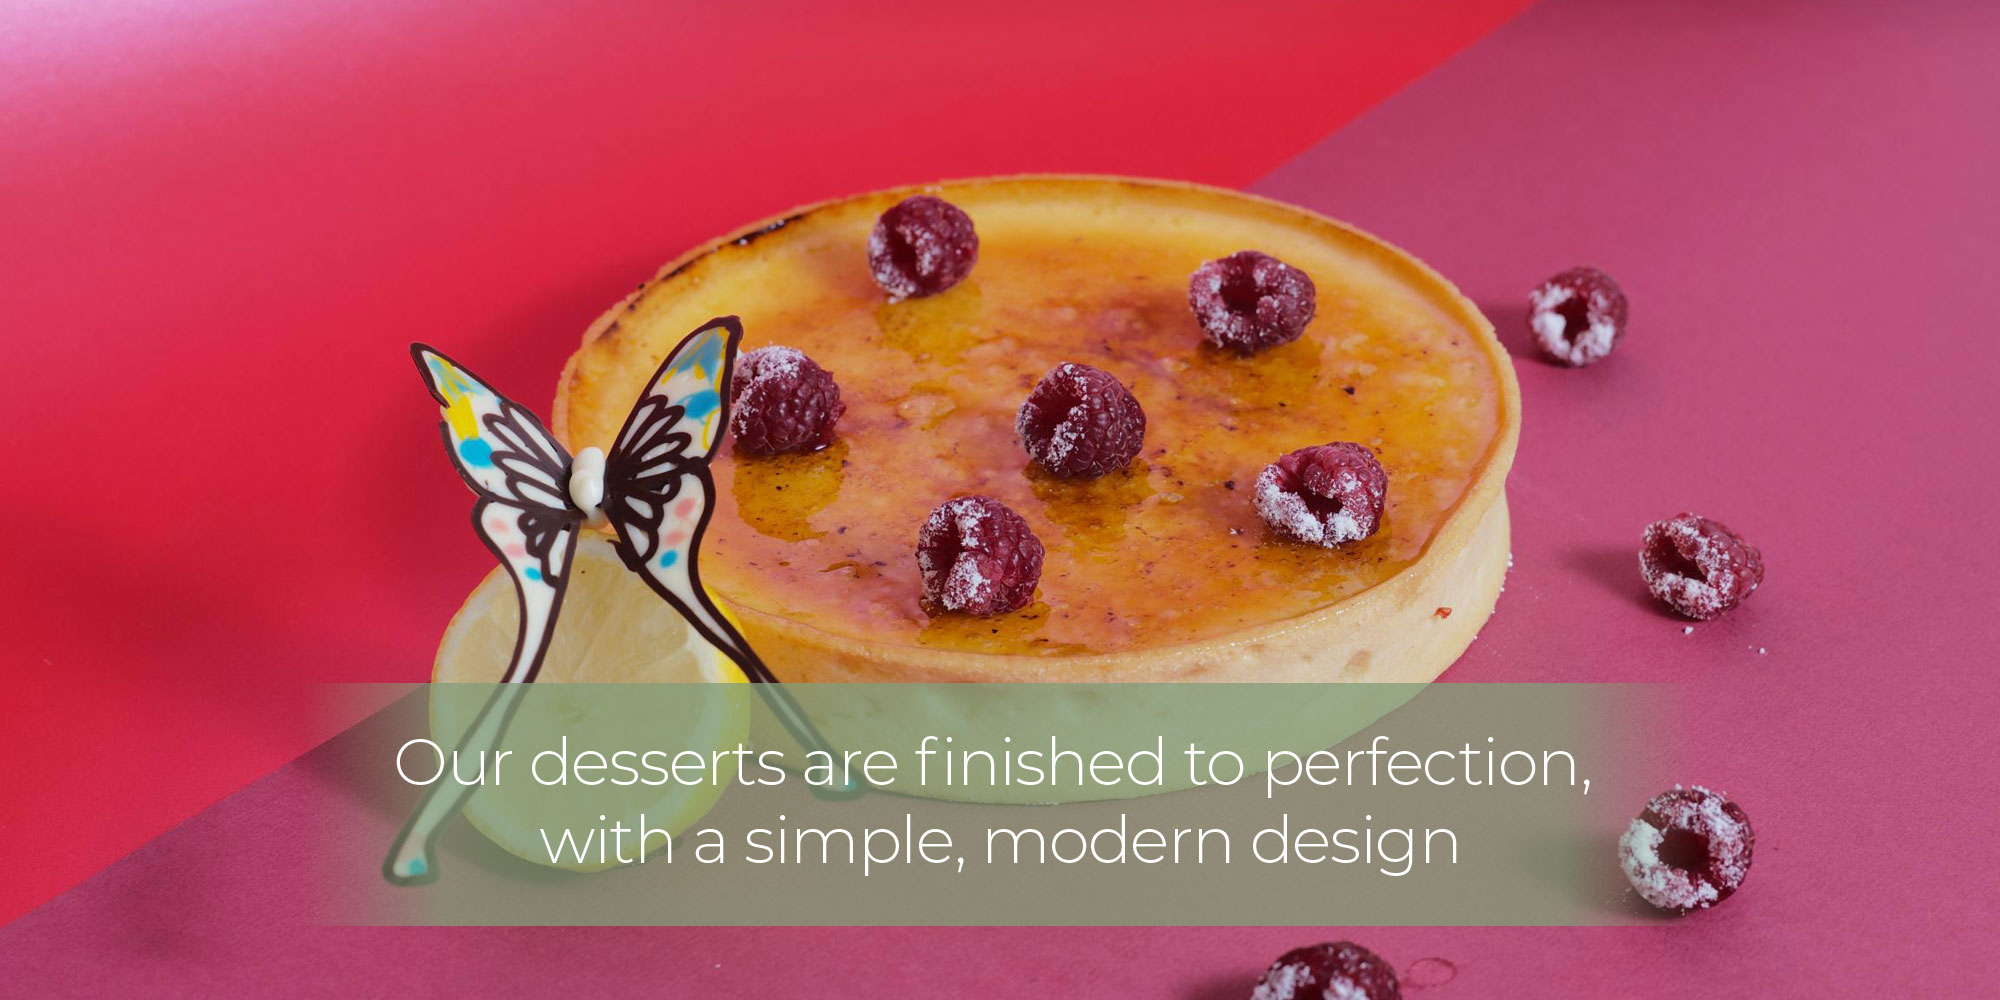 Our desserts are finished to perfection, with a simple, modern design